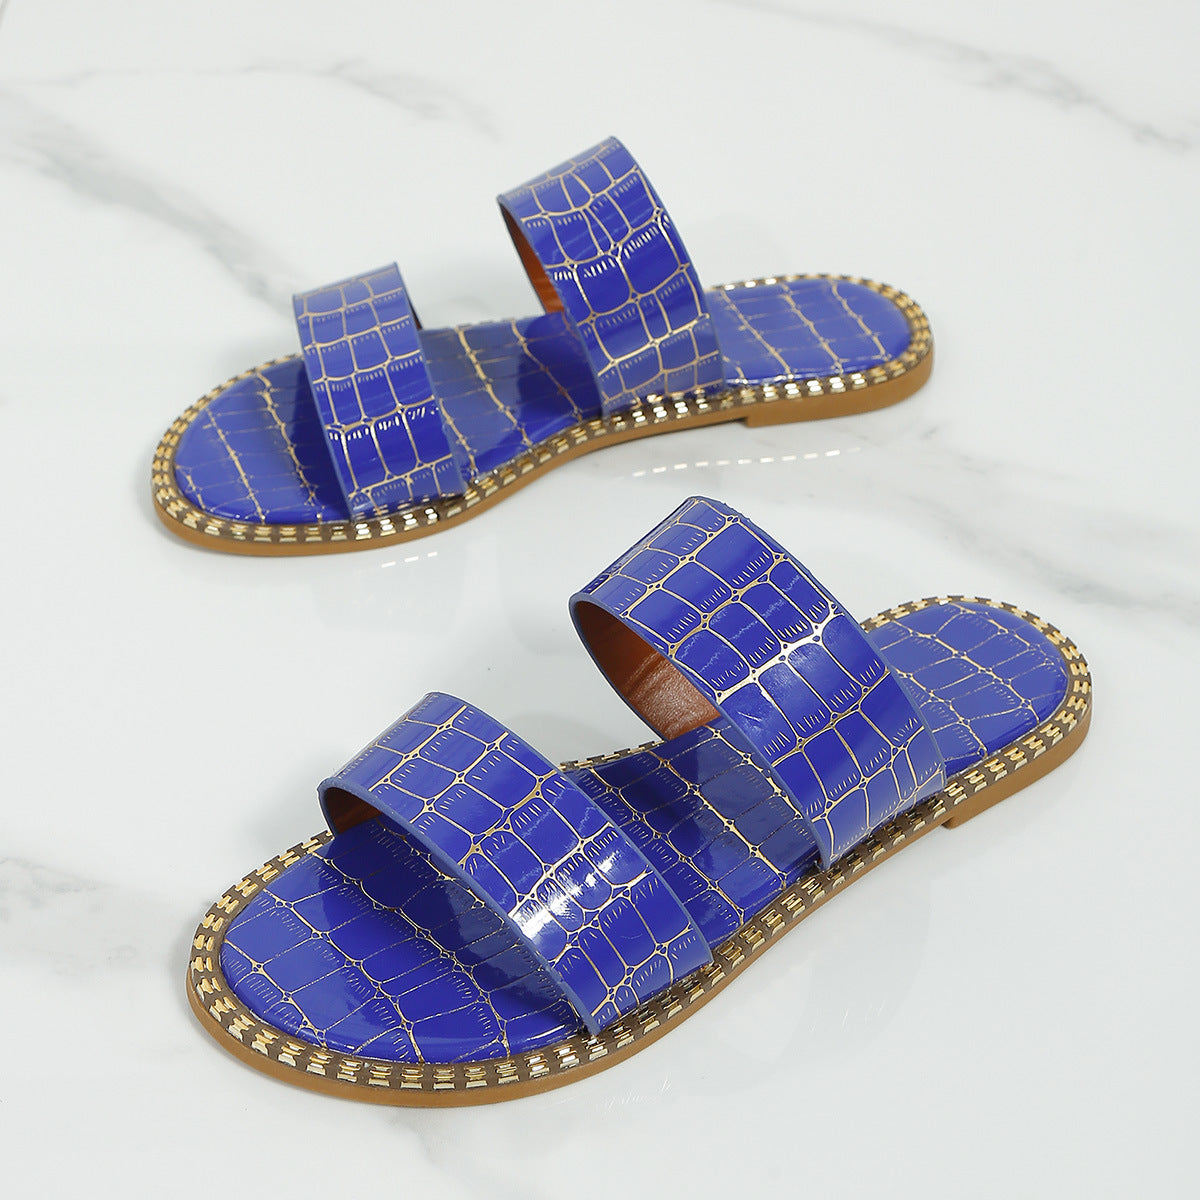 sandals  | Stone Textured Slippers Women Flat Sandals Summer Outdoor Beach Shoes | [option1] |  [option2]| thecurvestory.myshopify.com